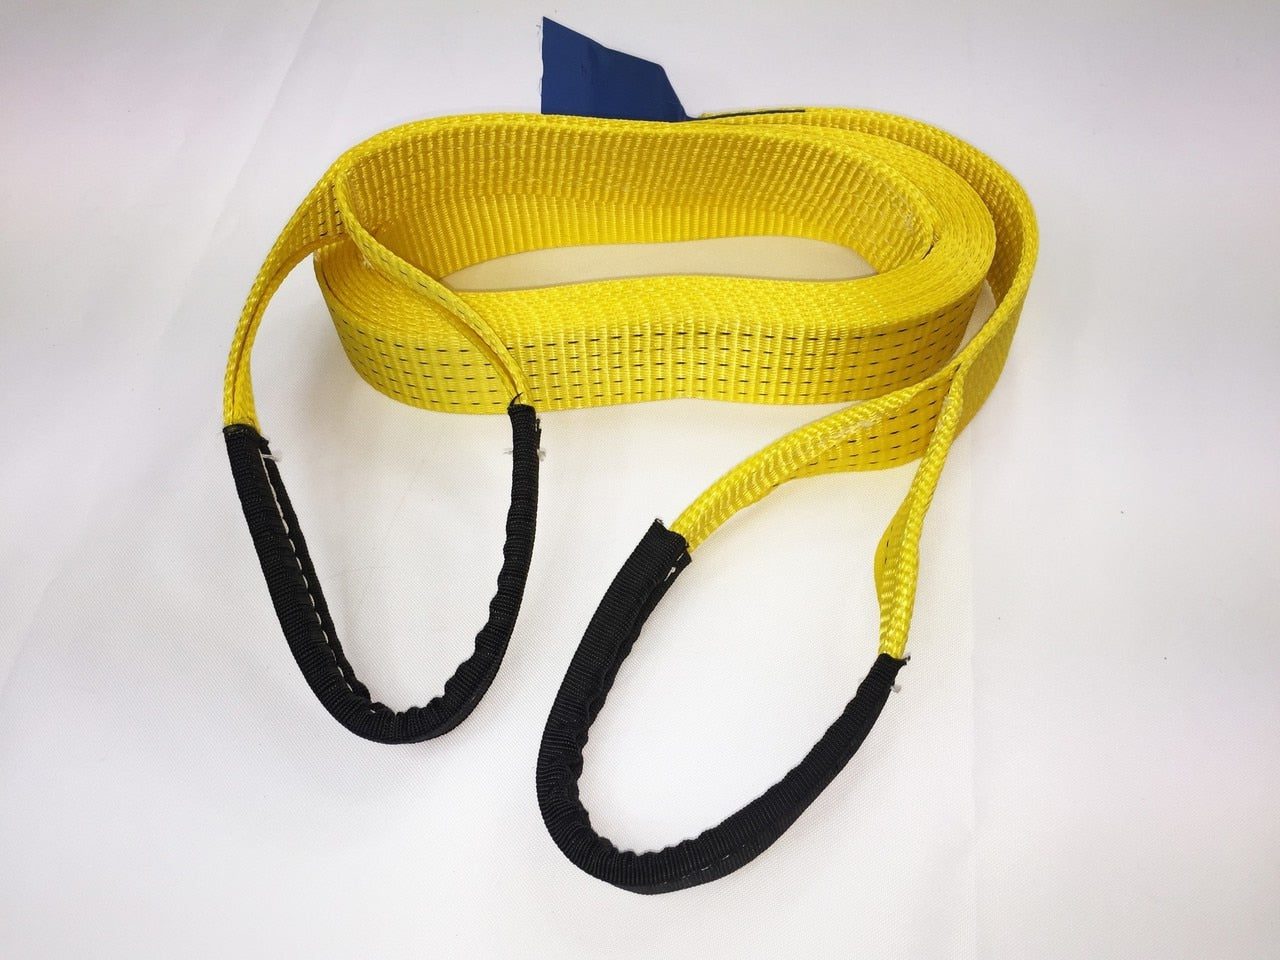 Strap-Style Tow Rope Durable High Strength Tow Strap up to 5 Tonne for Recovery Tow with Free Carry Case 